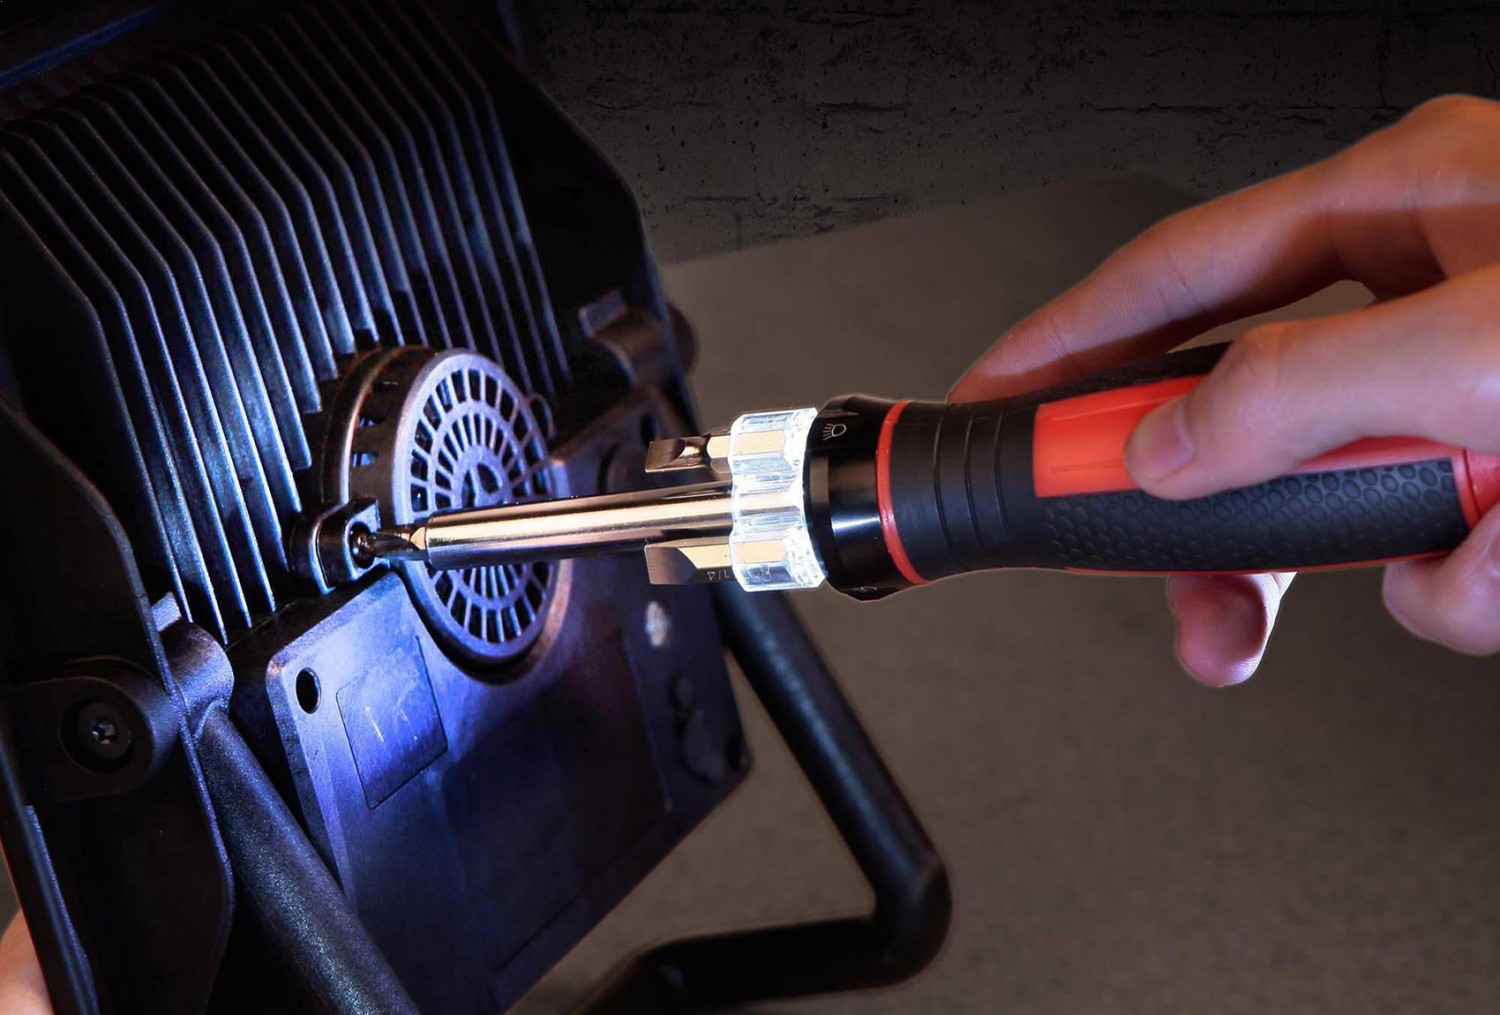 Hyper Tough 4-in-1 LED Lighted Screwdriver with Batteries